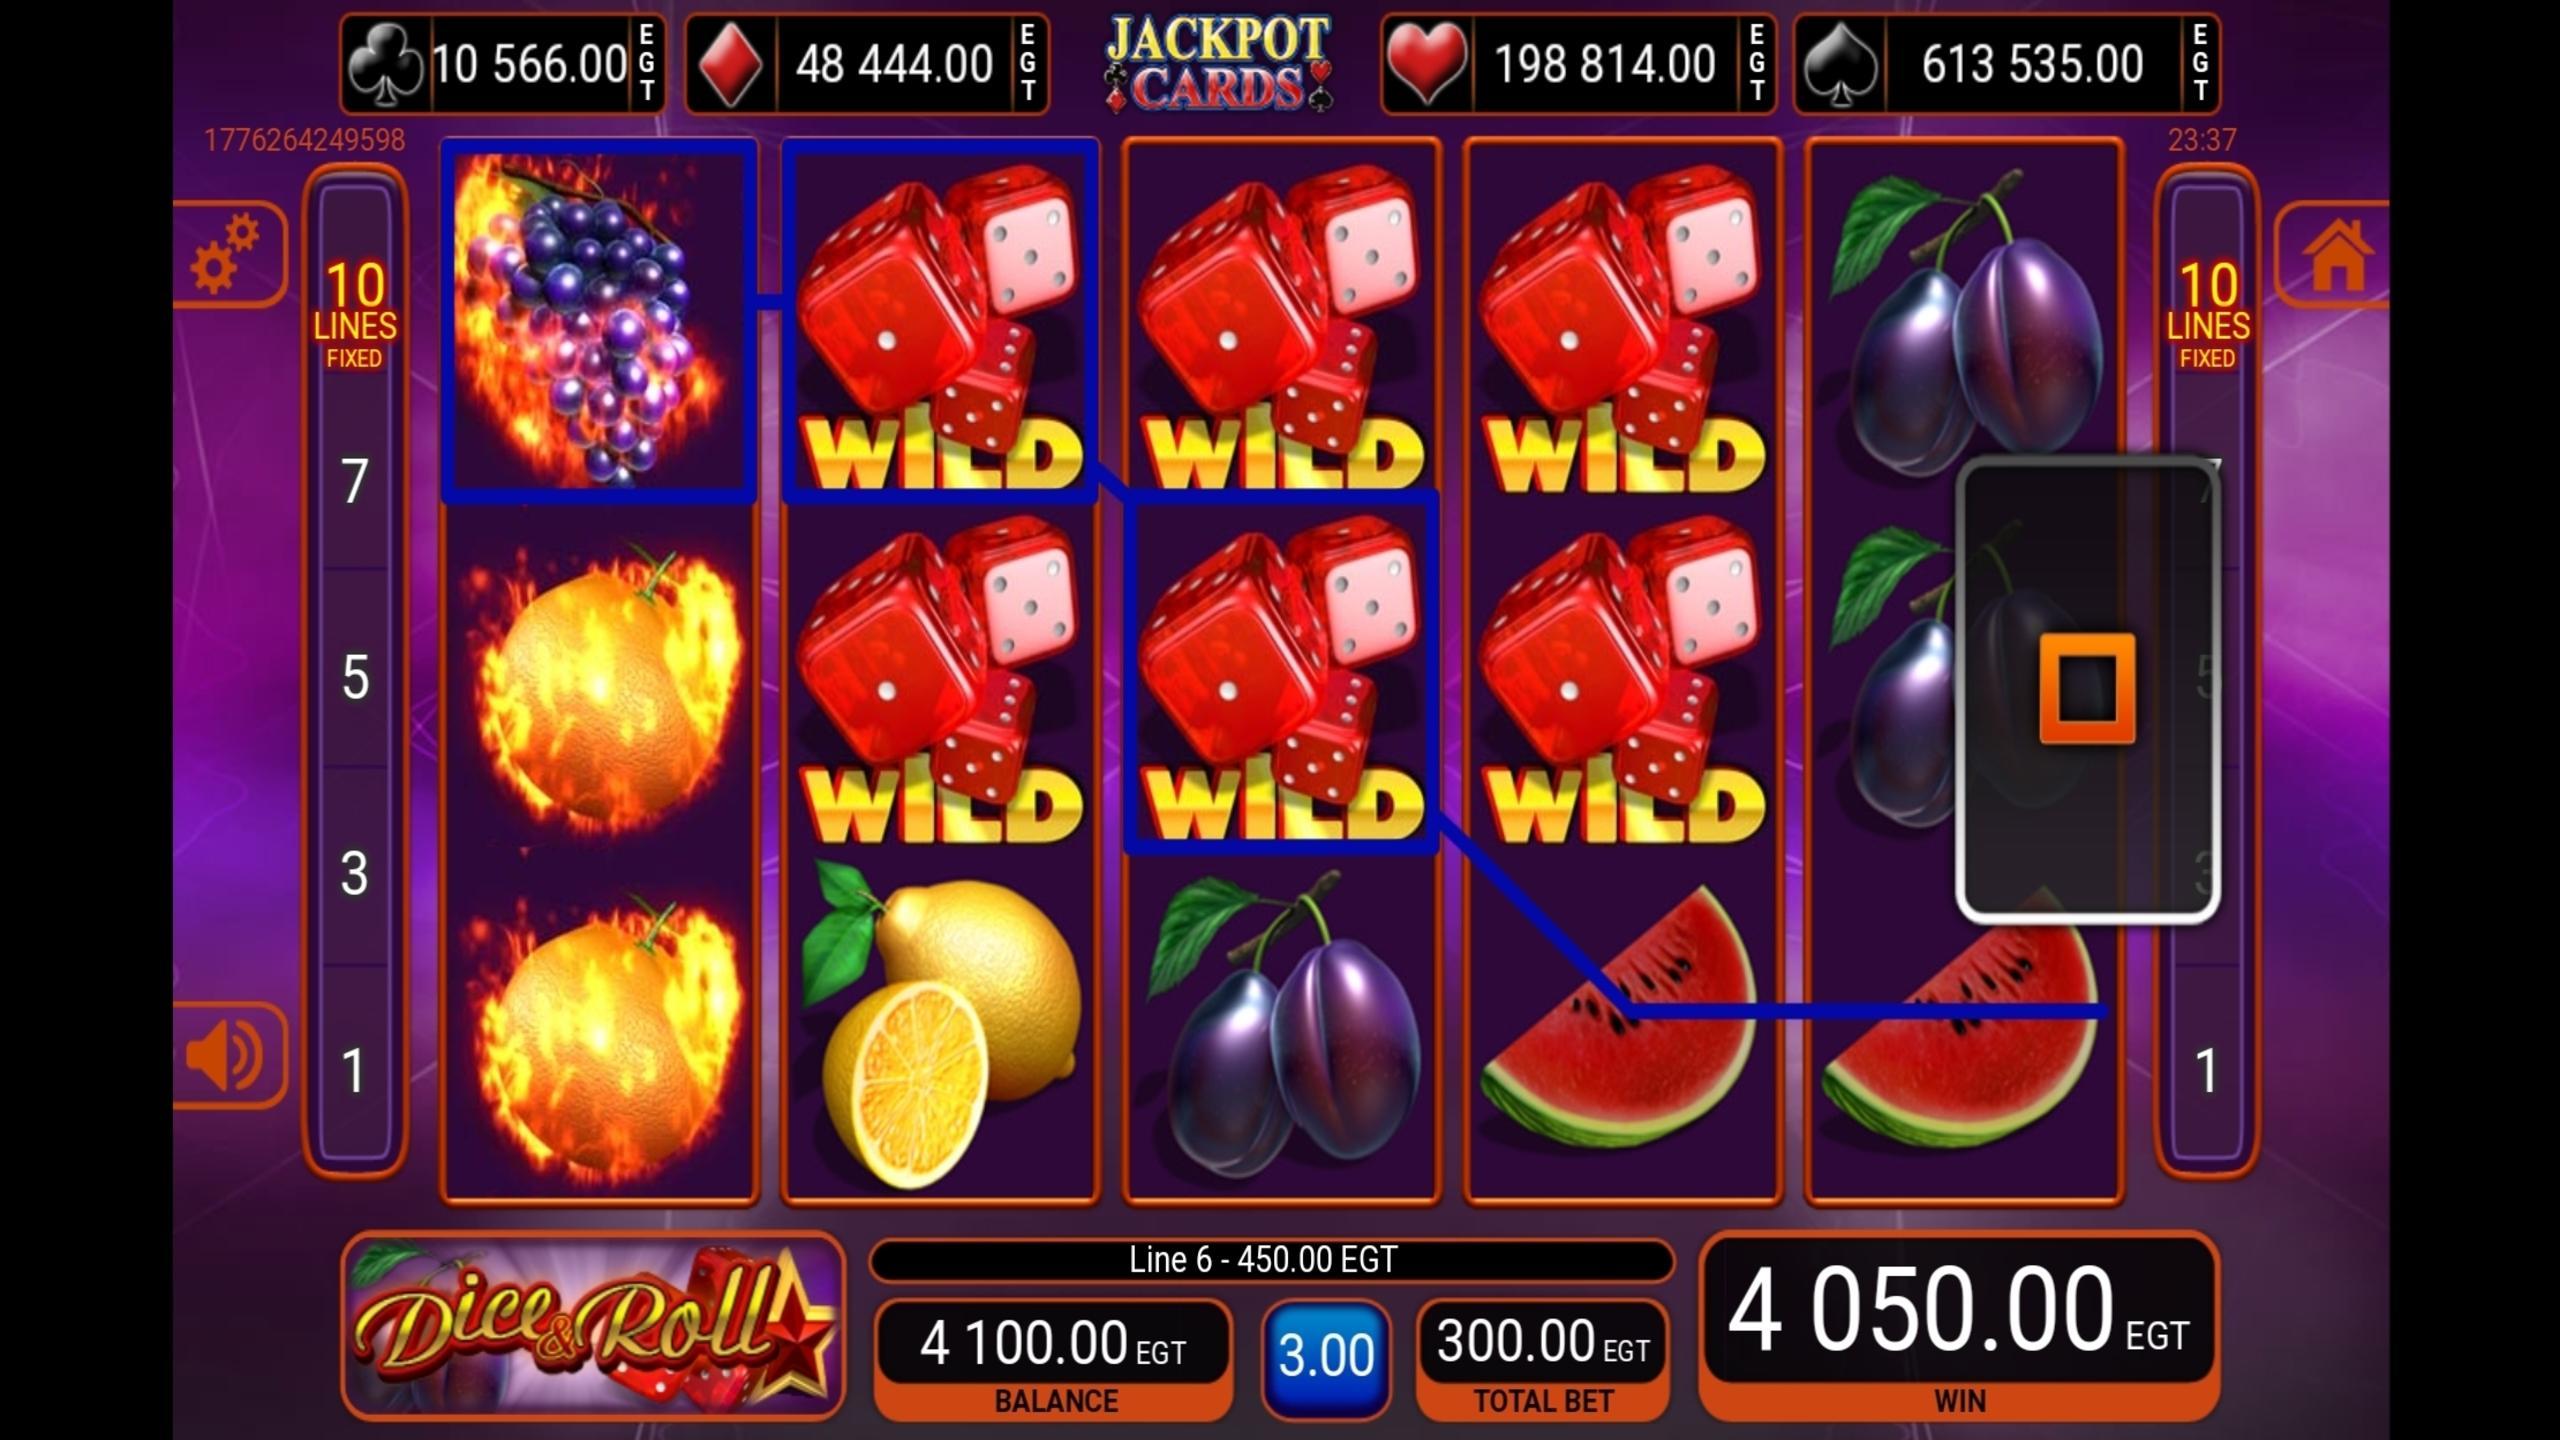 Dice and roll когда выйдет. Dice Roll Slot. Dice and Roll Oyun. Oker’s Jewels dice Slot.